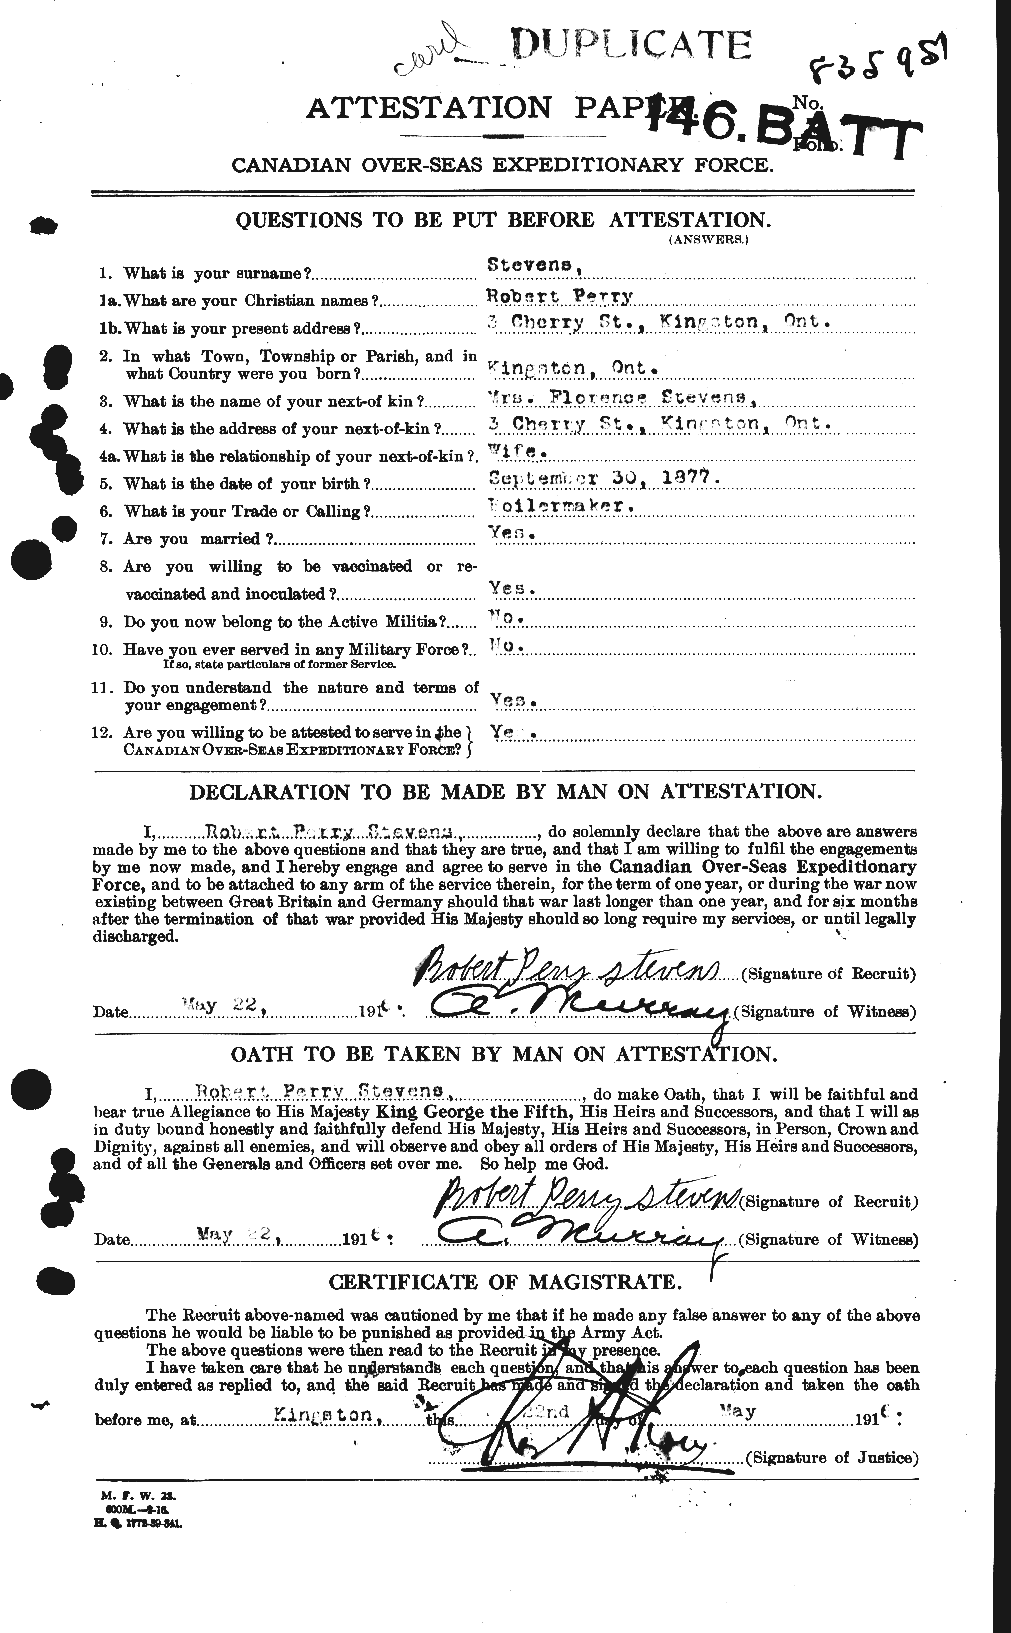 Personnel Records of the First World War - CEF 118299a